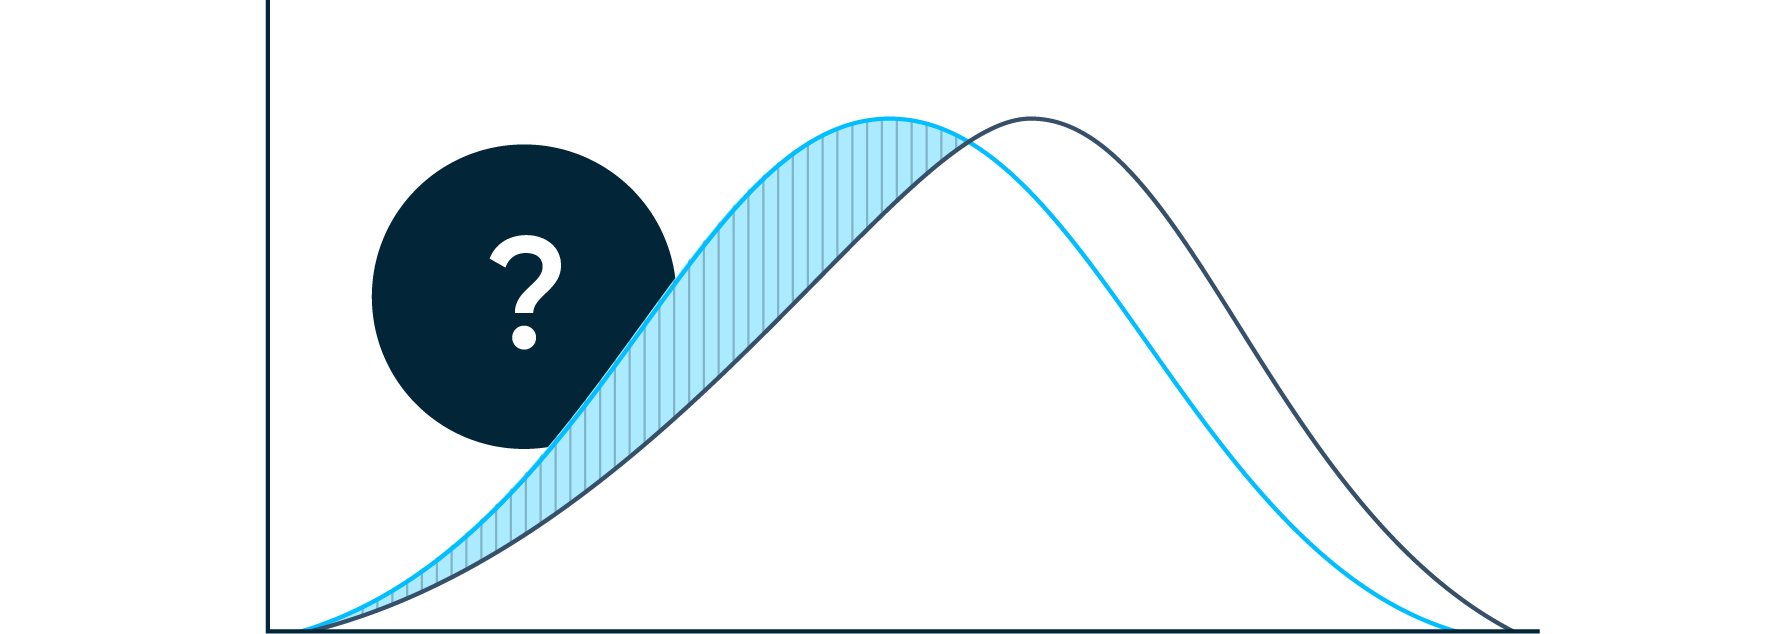 Abstract image depicting data drift in a graphical format.